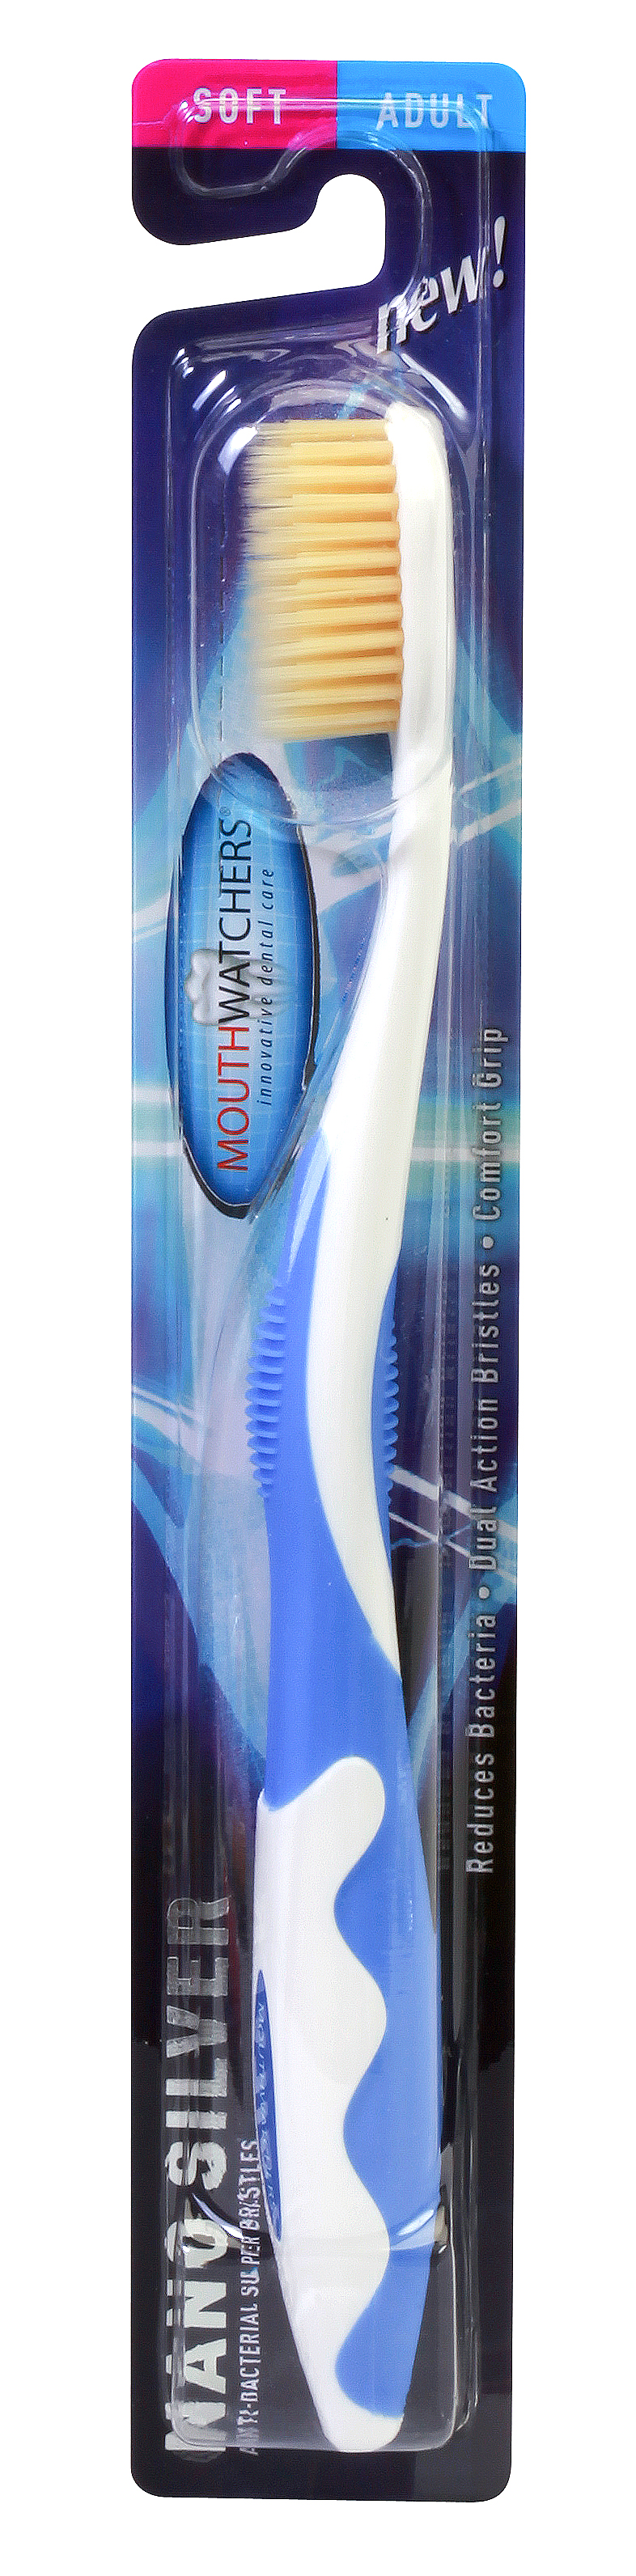 Mouth Watchers Toothbrush Adult NANO SILVER